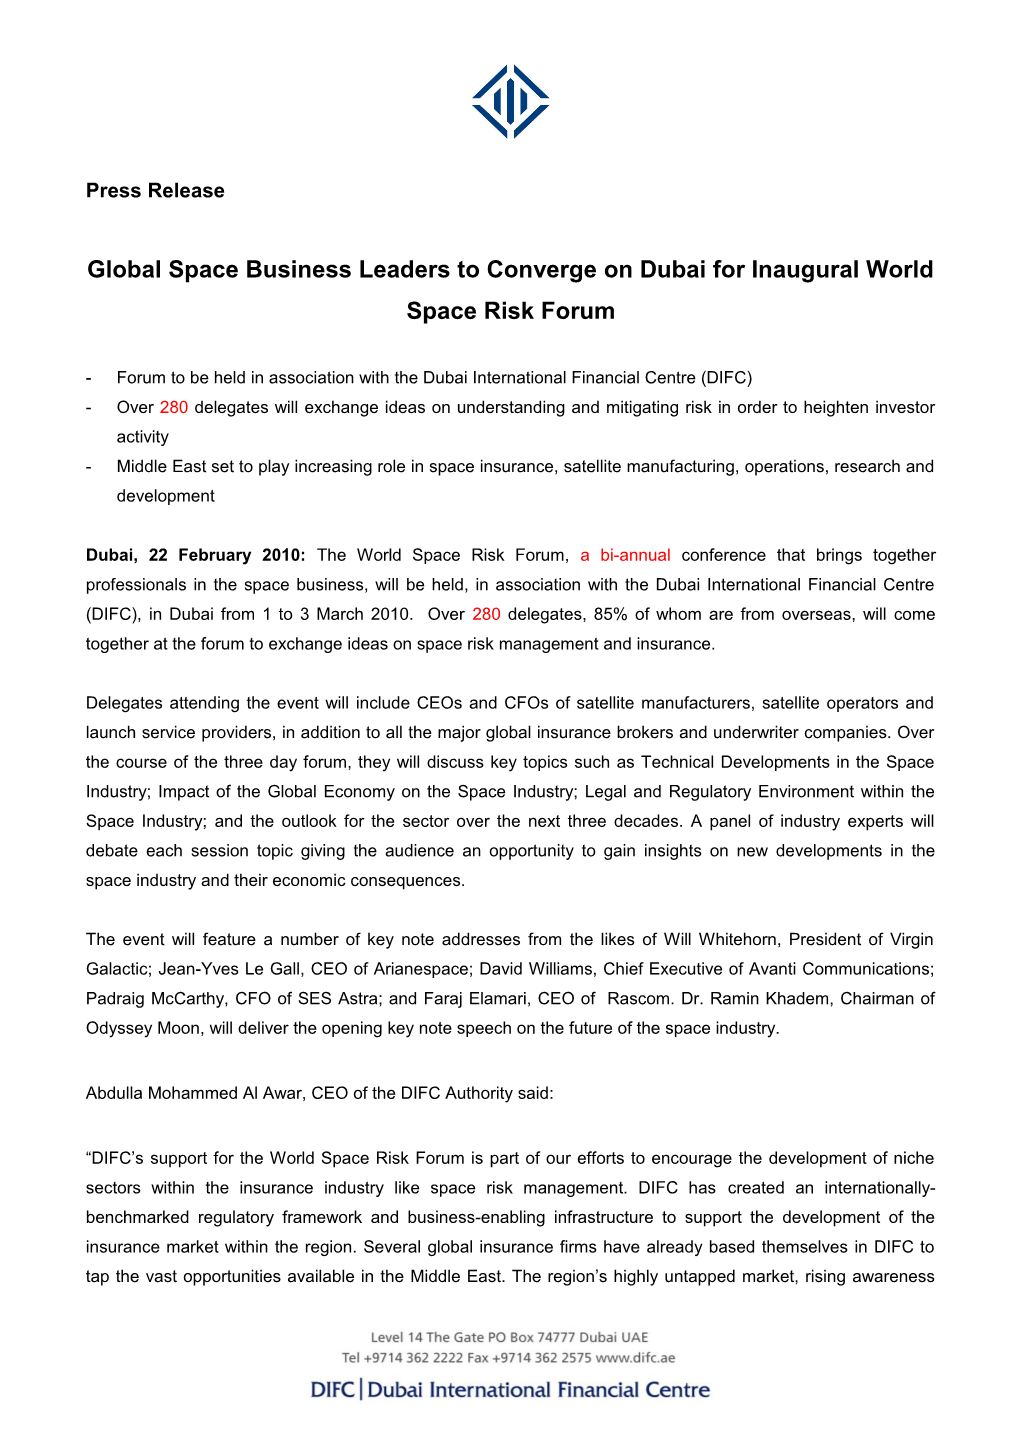 Global Space Business Leaders to Converge on Dubai for Inaugural World Space Risk Forum